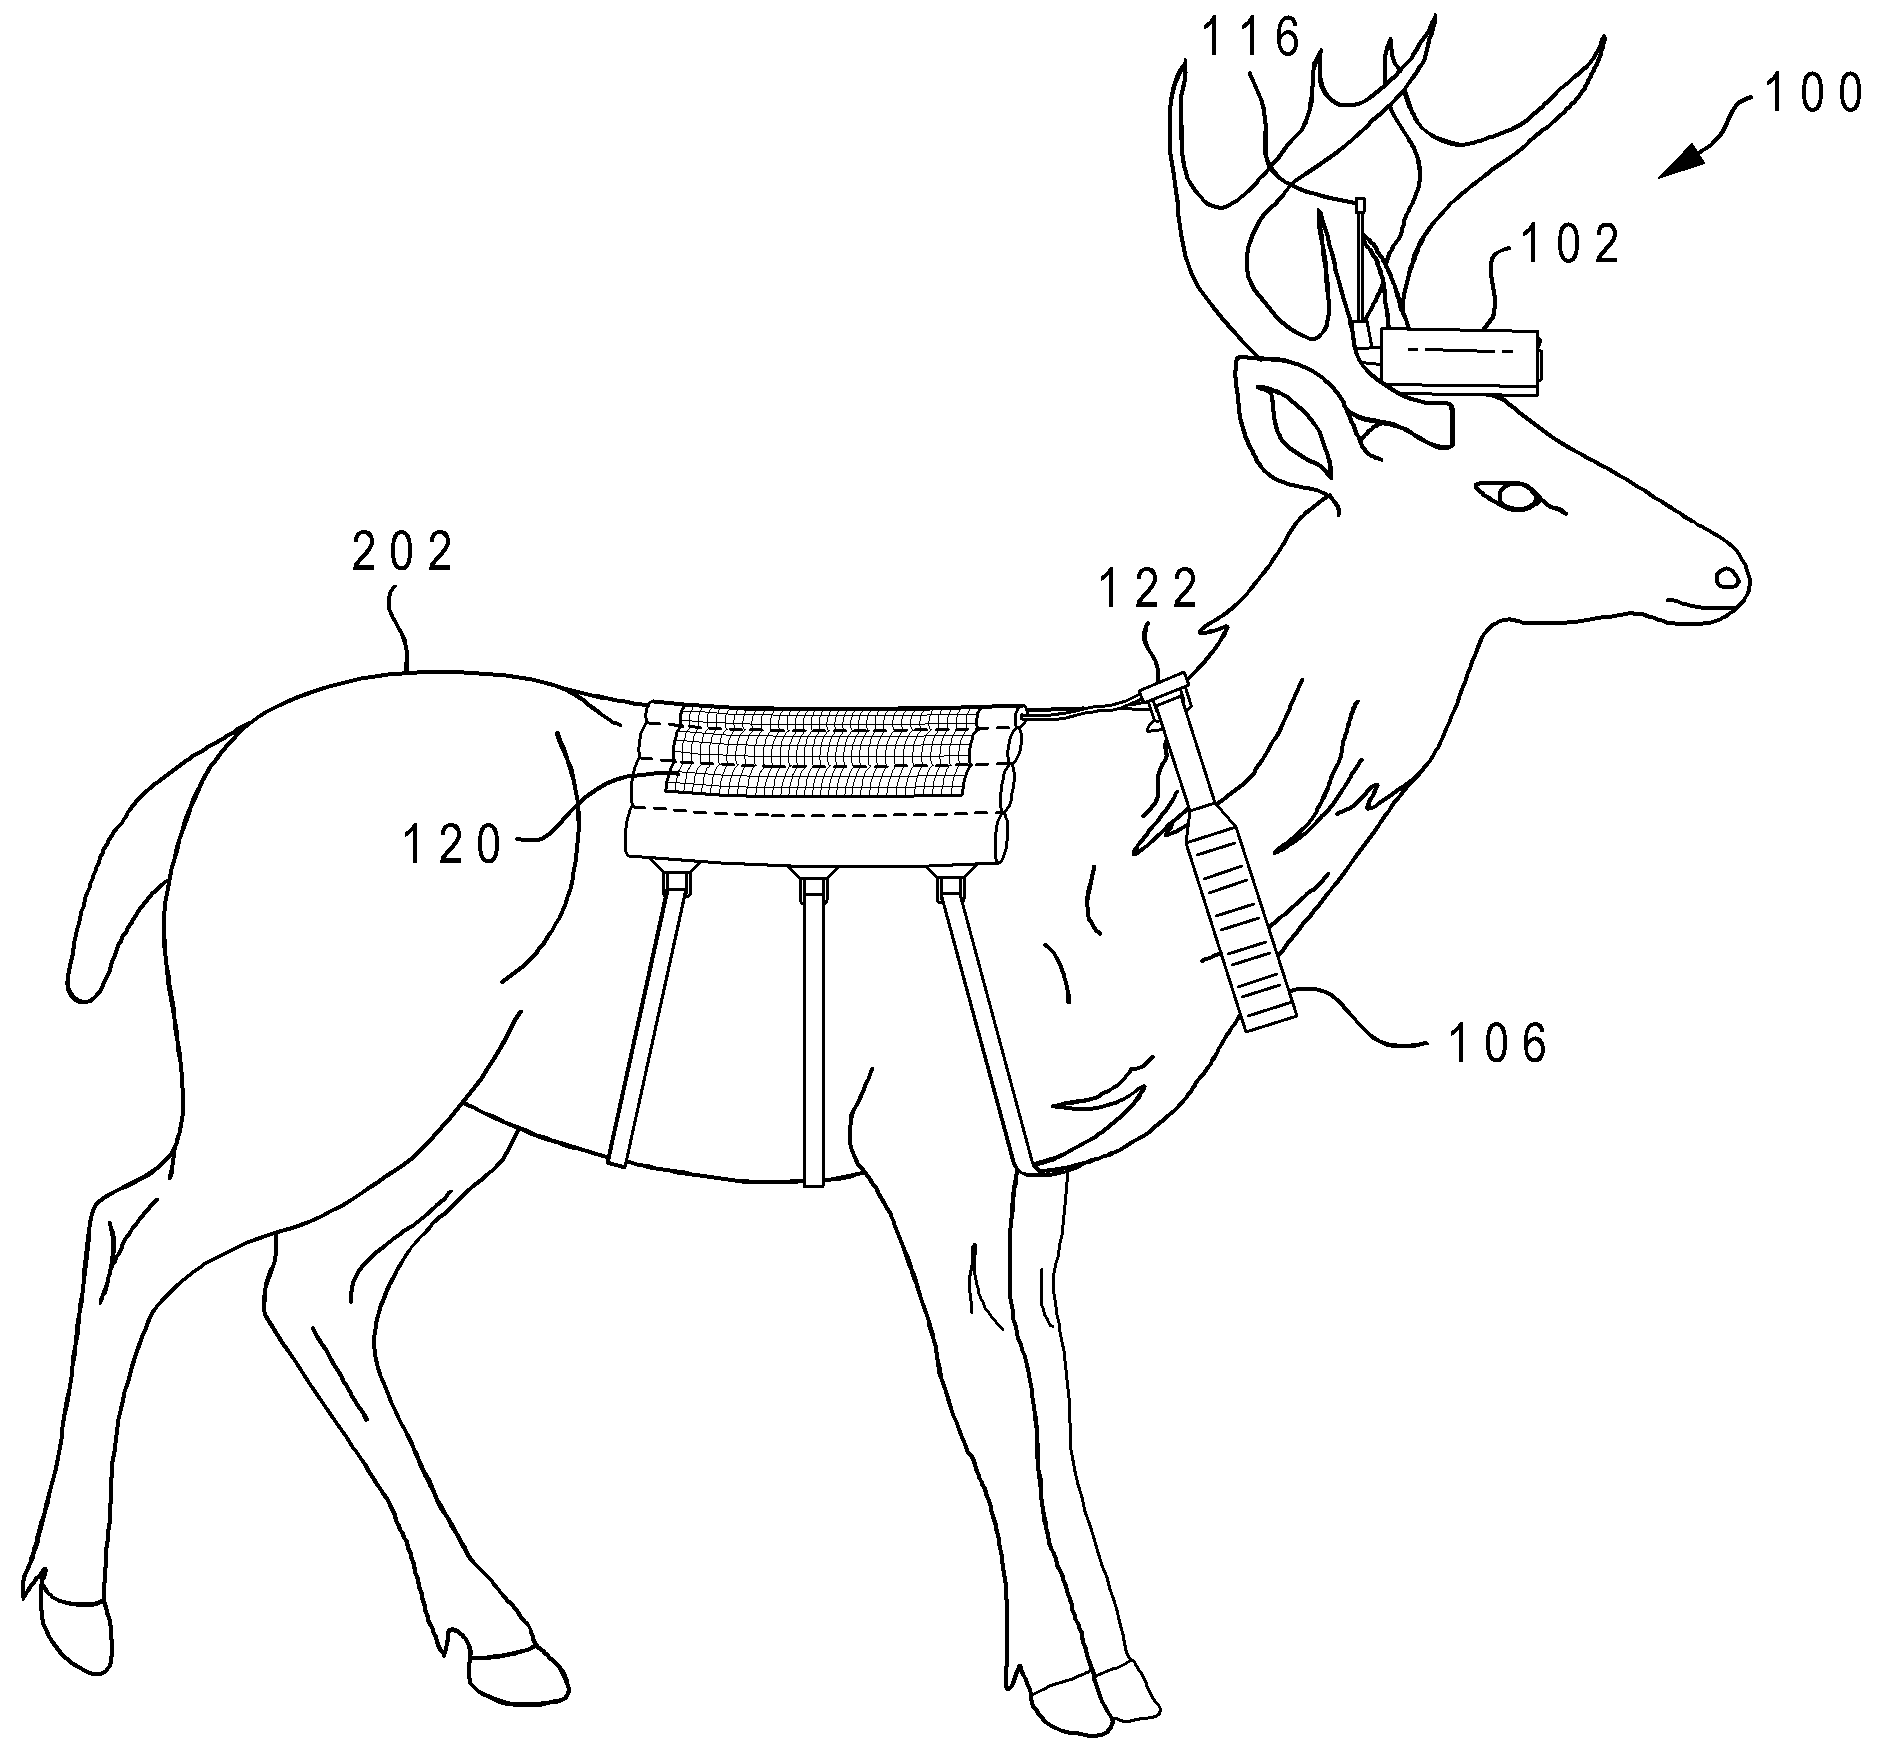 Method and apparatus for monitoring an animal in real time